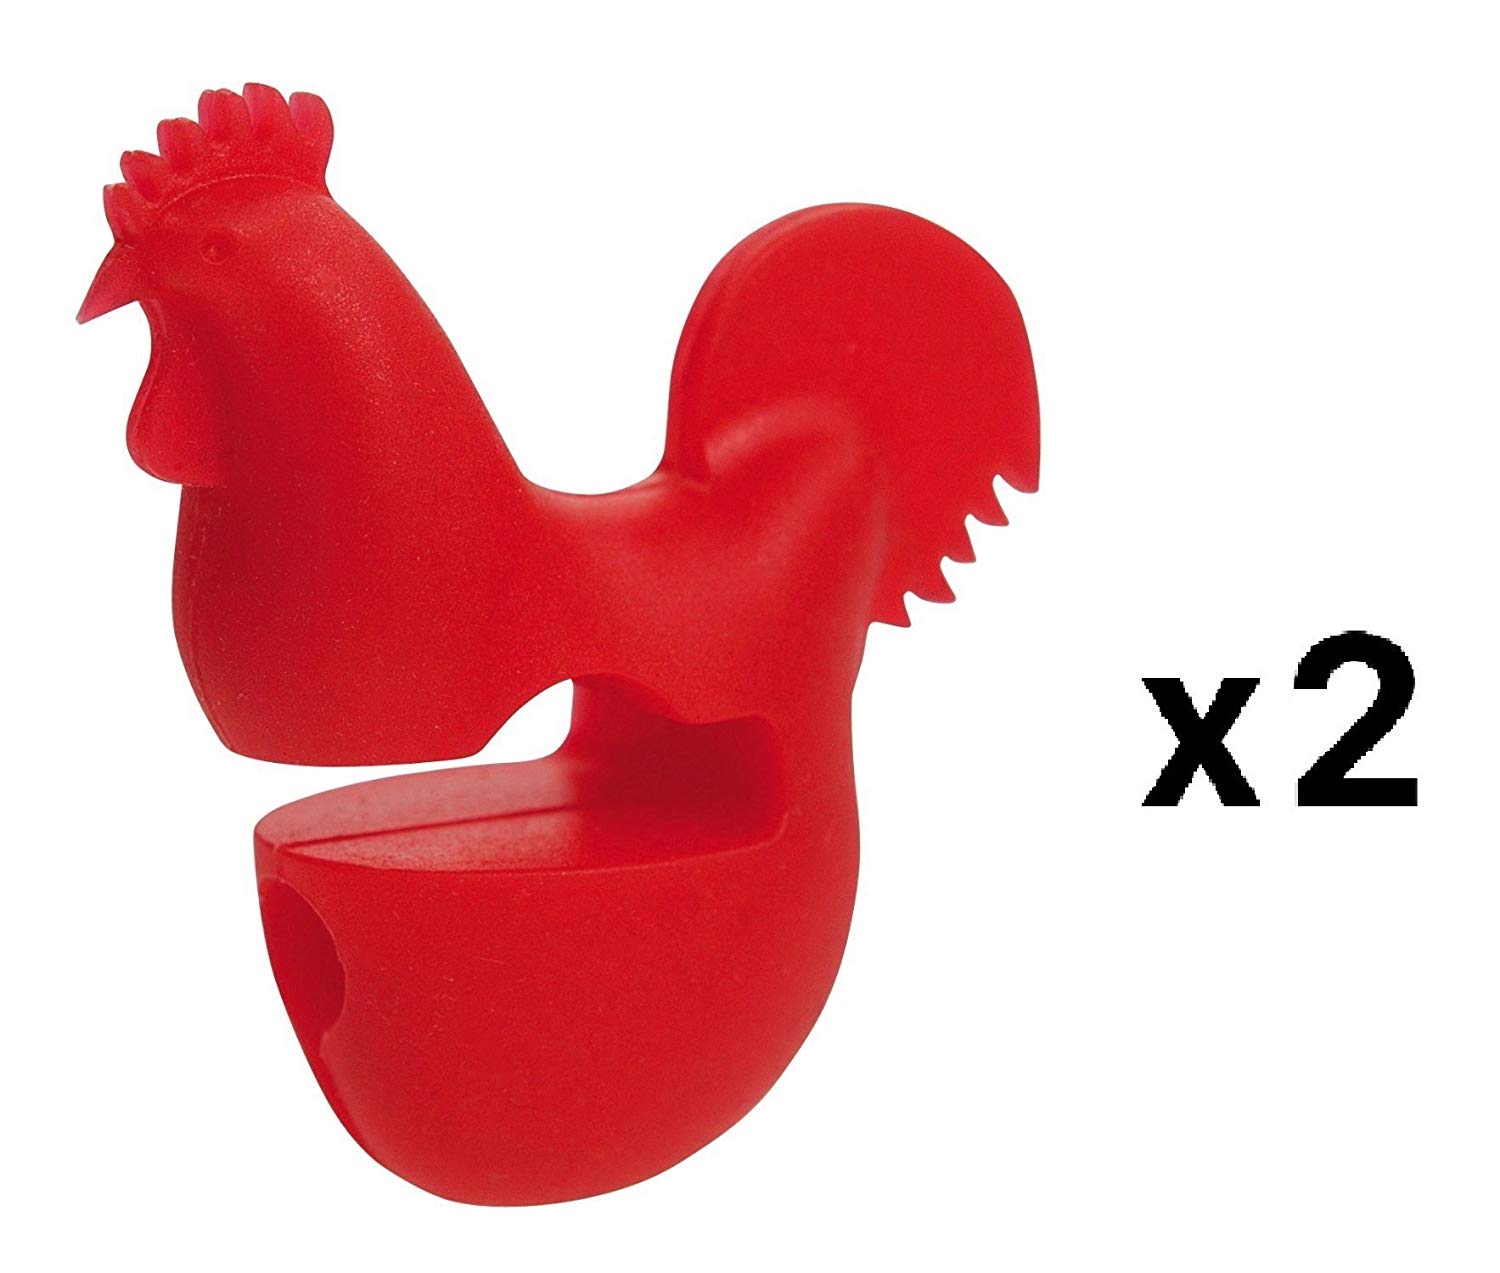 Fox Run Silicone Rooster Spoon Rest Ladle Spatula Holder Pot Pan Clip (2-Pack)